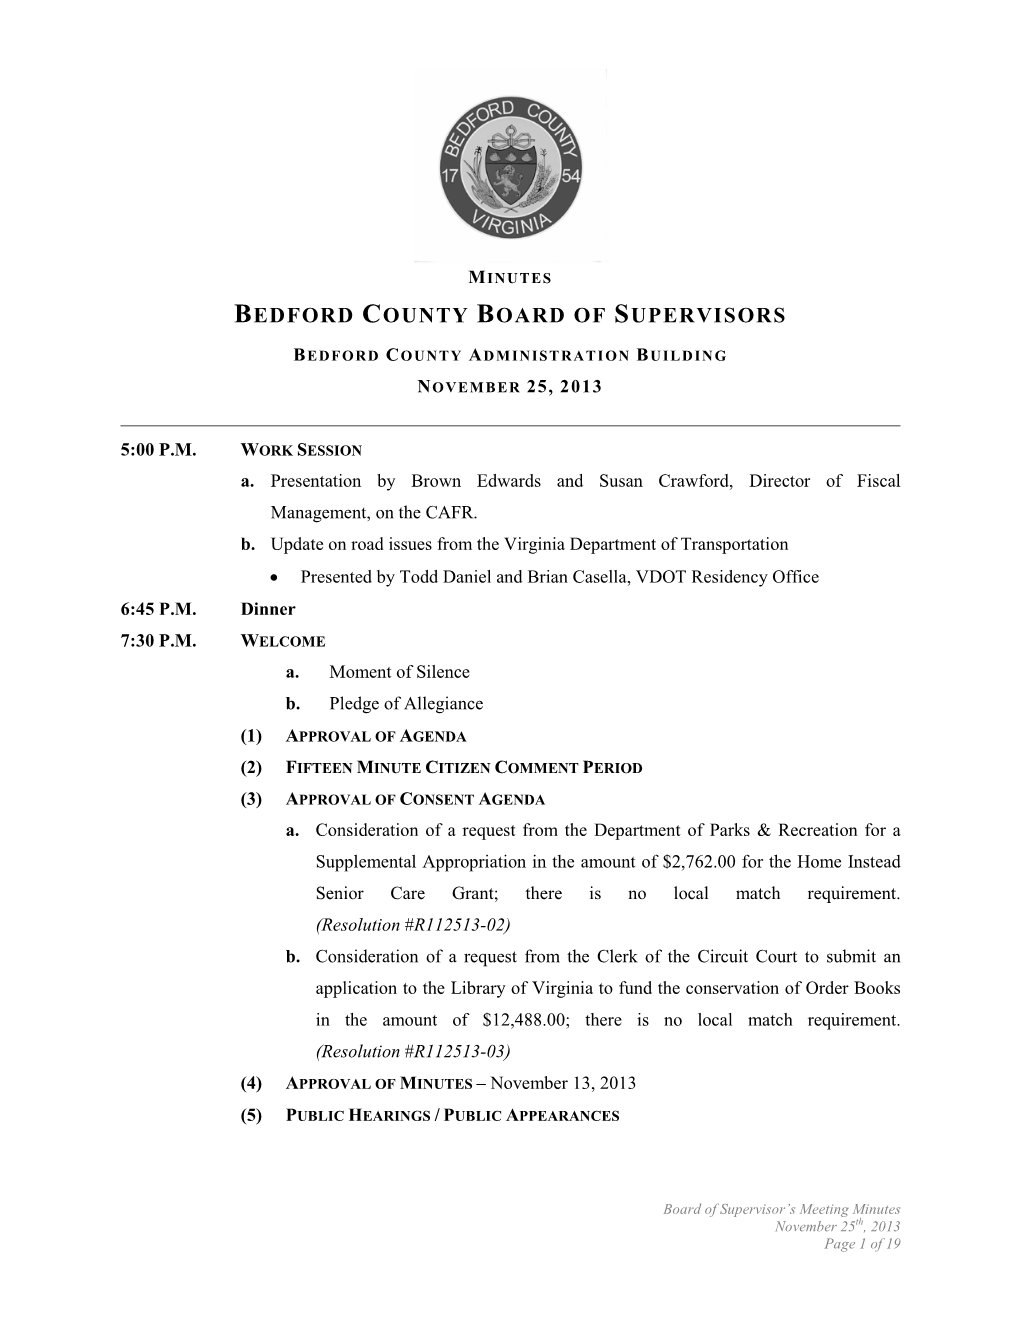 Bedford County Board of Supervisors